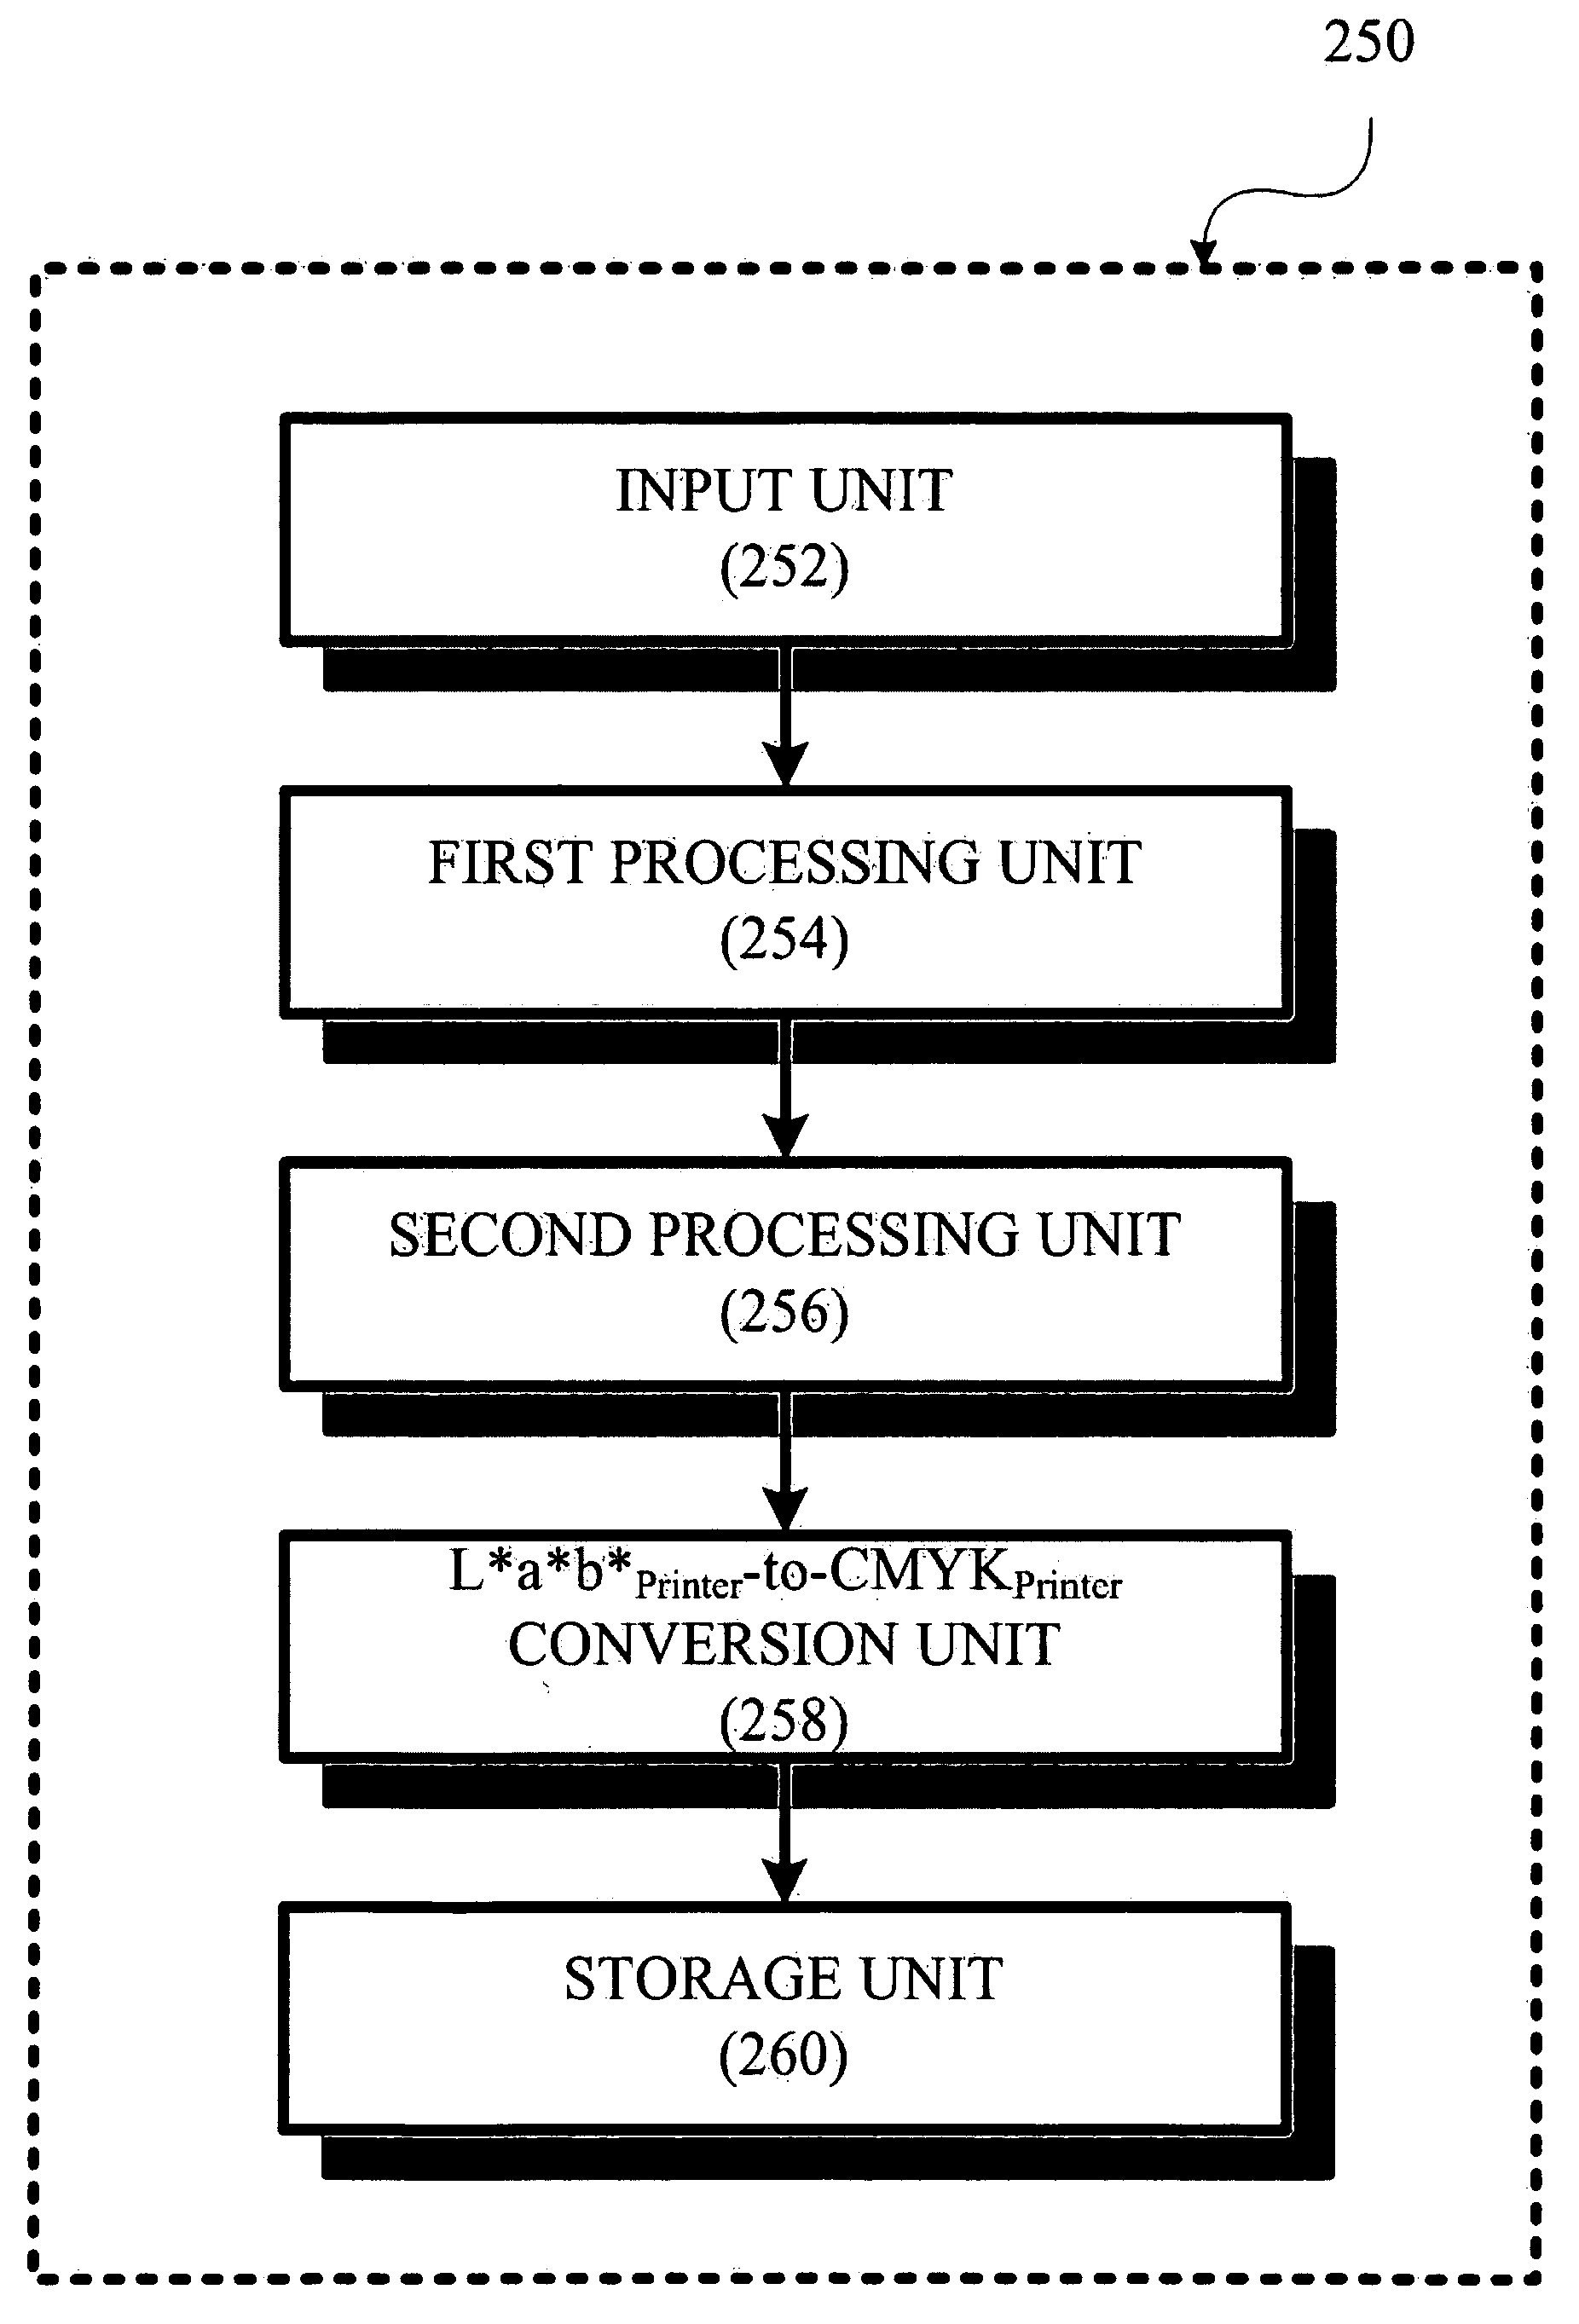 Method and apparatus for converting input color space into CMYK color space